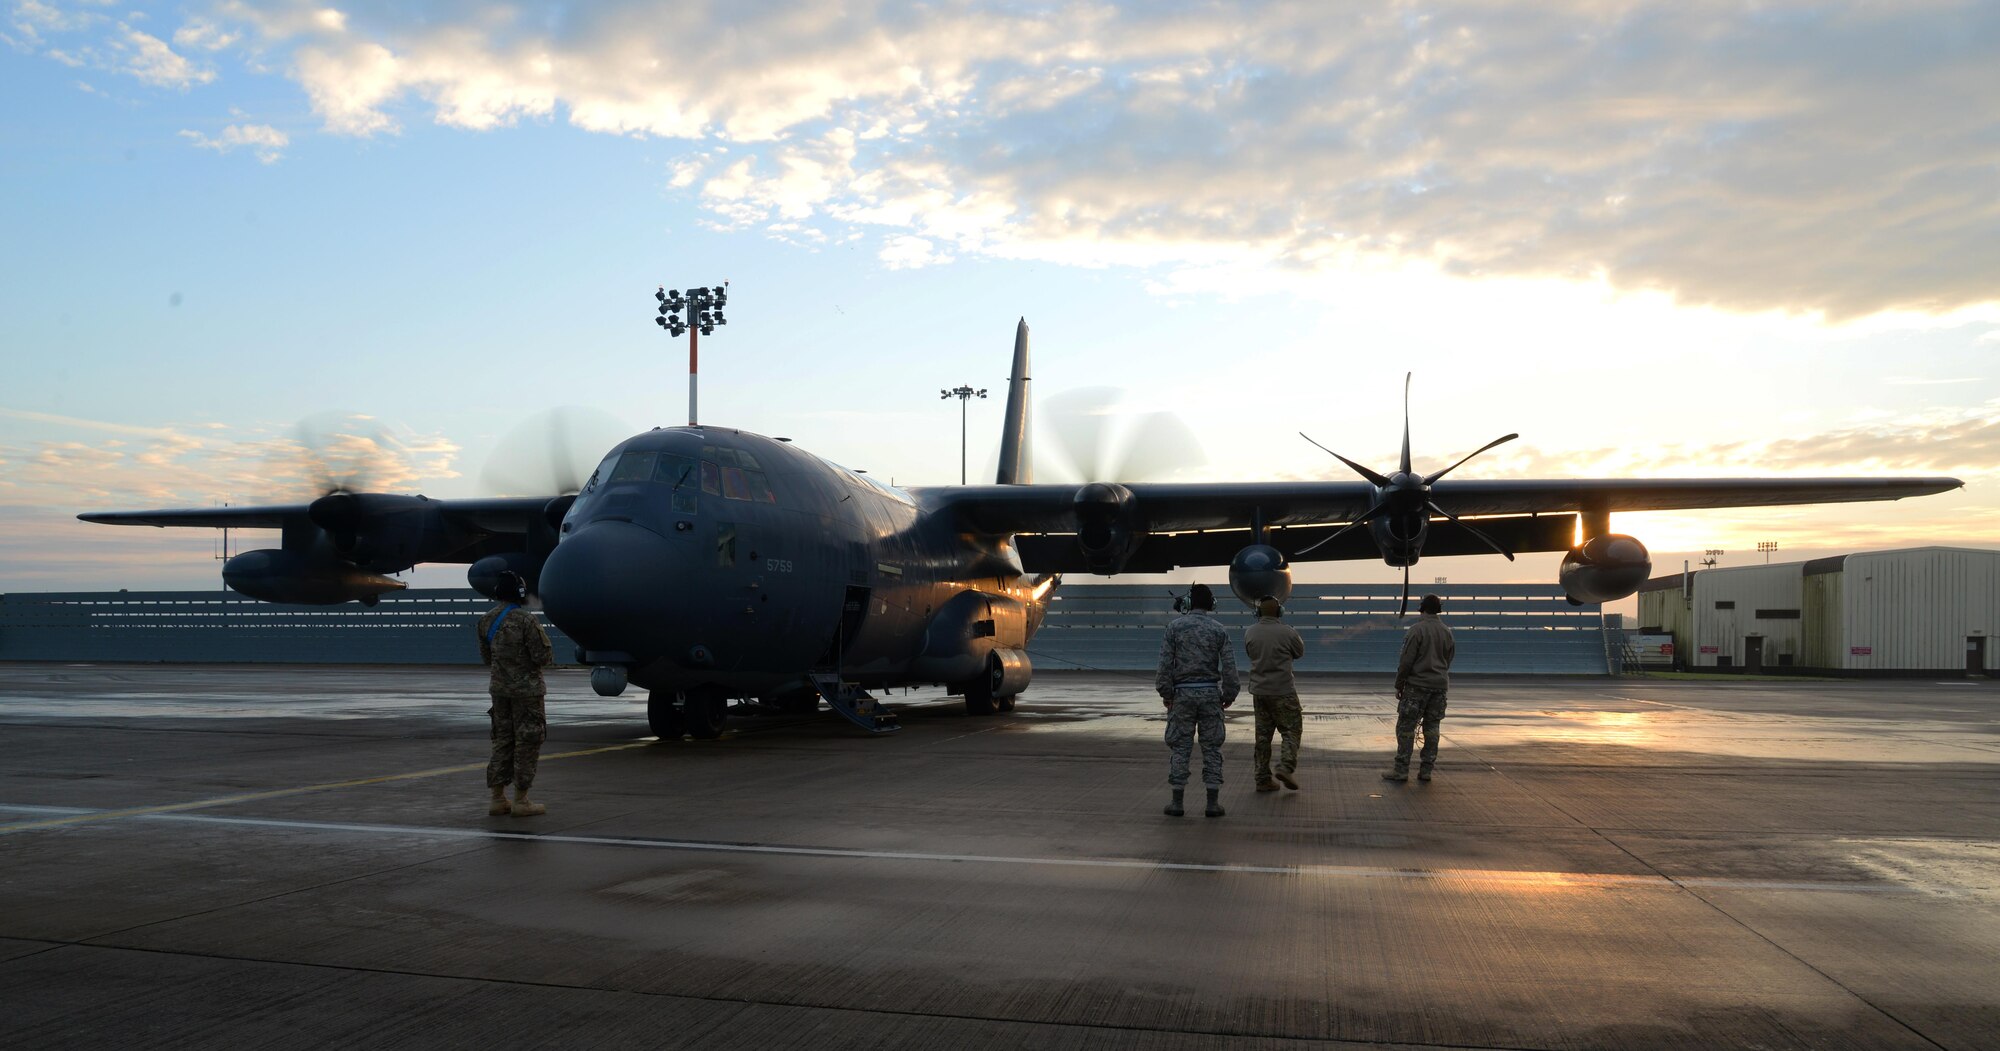 U.S. Air Force maintainers and aircrew assigned to the 352d Special Operations Wing look on as an MC-130J Commando II from the 67th Special Operations Squadron starts its engines Jan. 17, 2017, on RAF Mildenhall, England. Freezing temperatures require extra procedures, like de-icing, to avoid damage to the aircraft. (U.S. Air Force photo by Senior Airman Justine Rho)